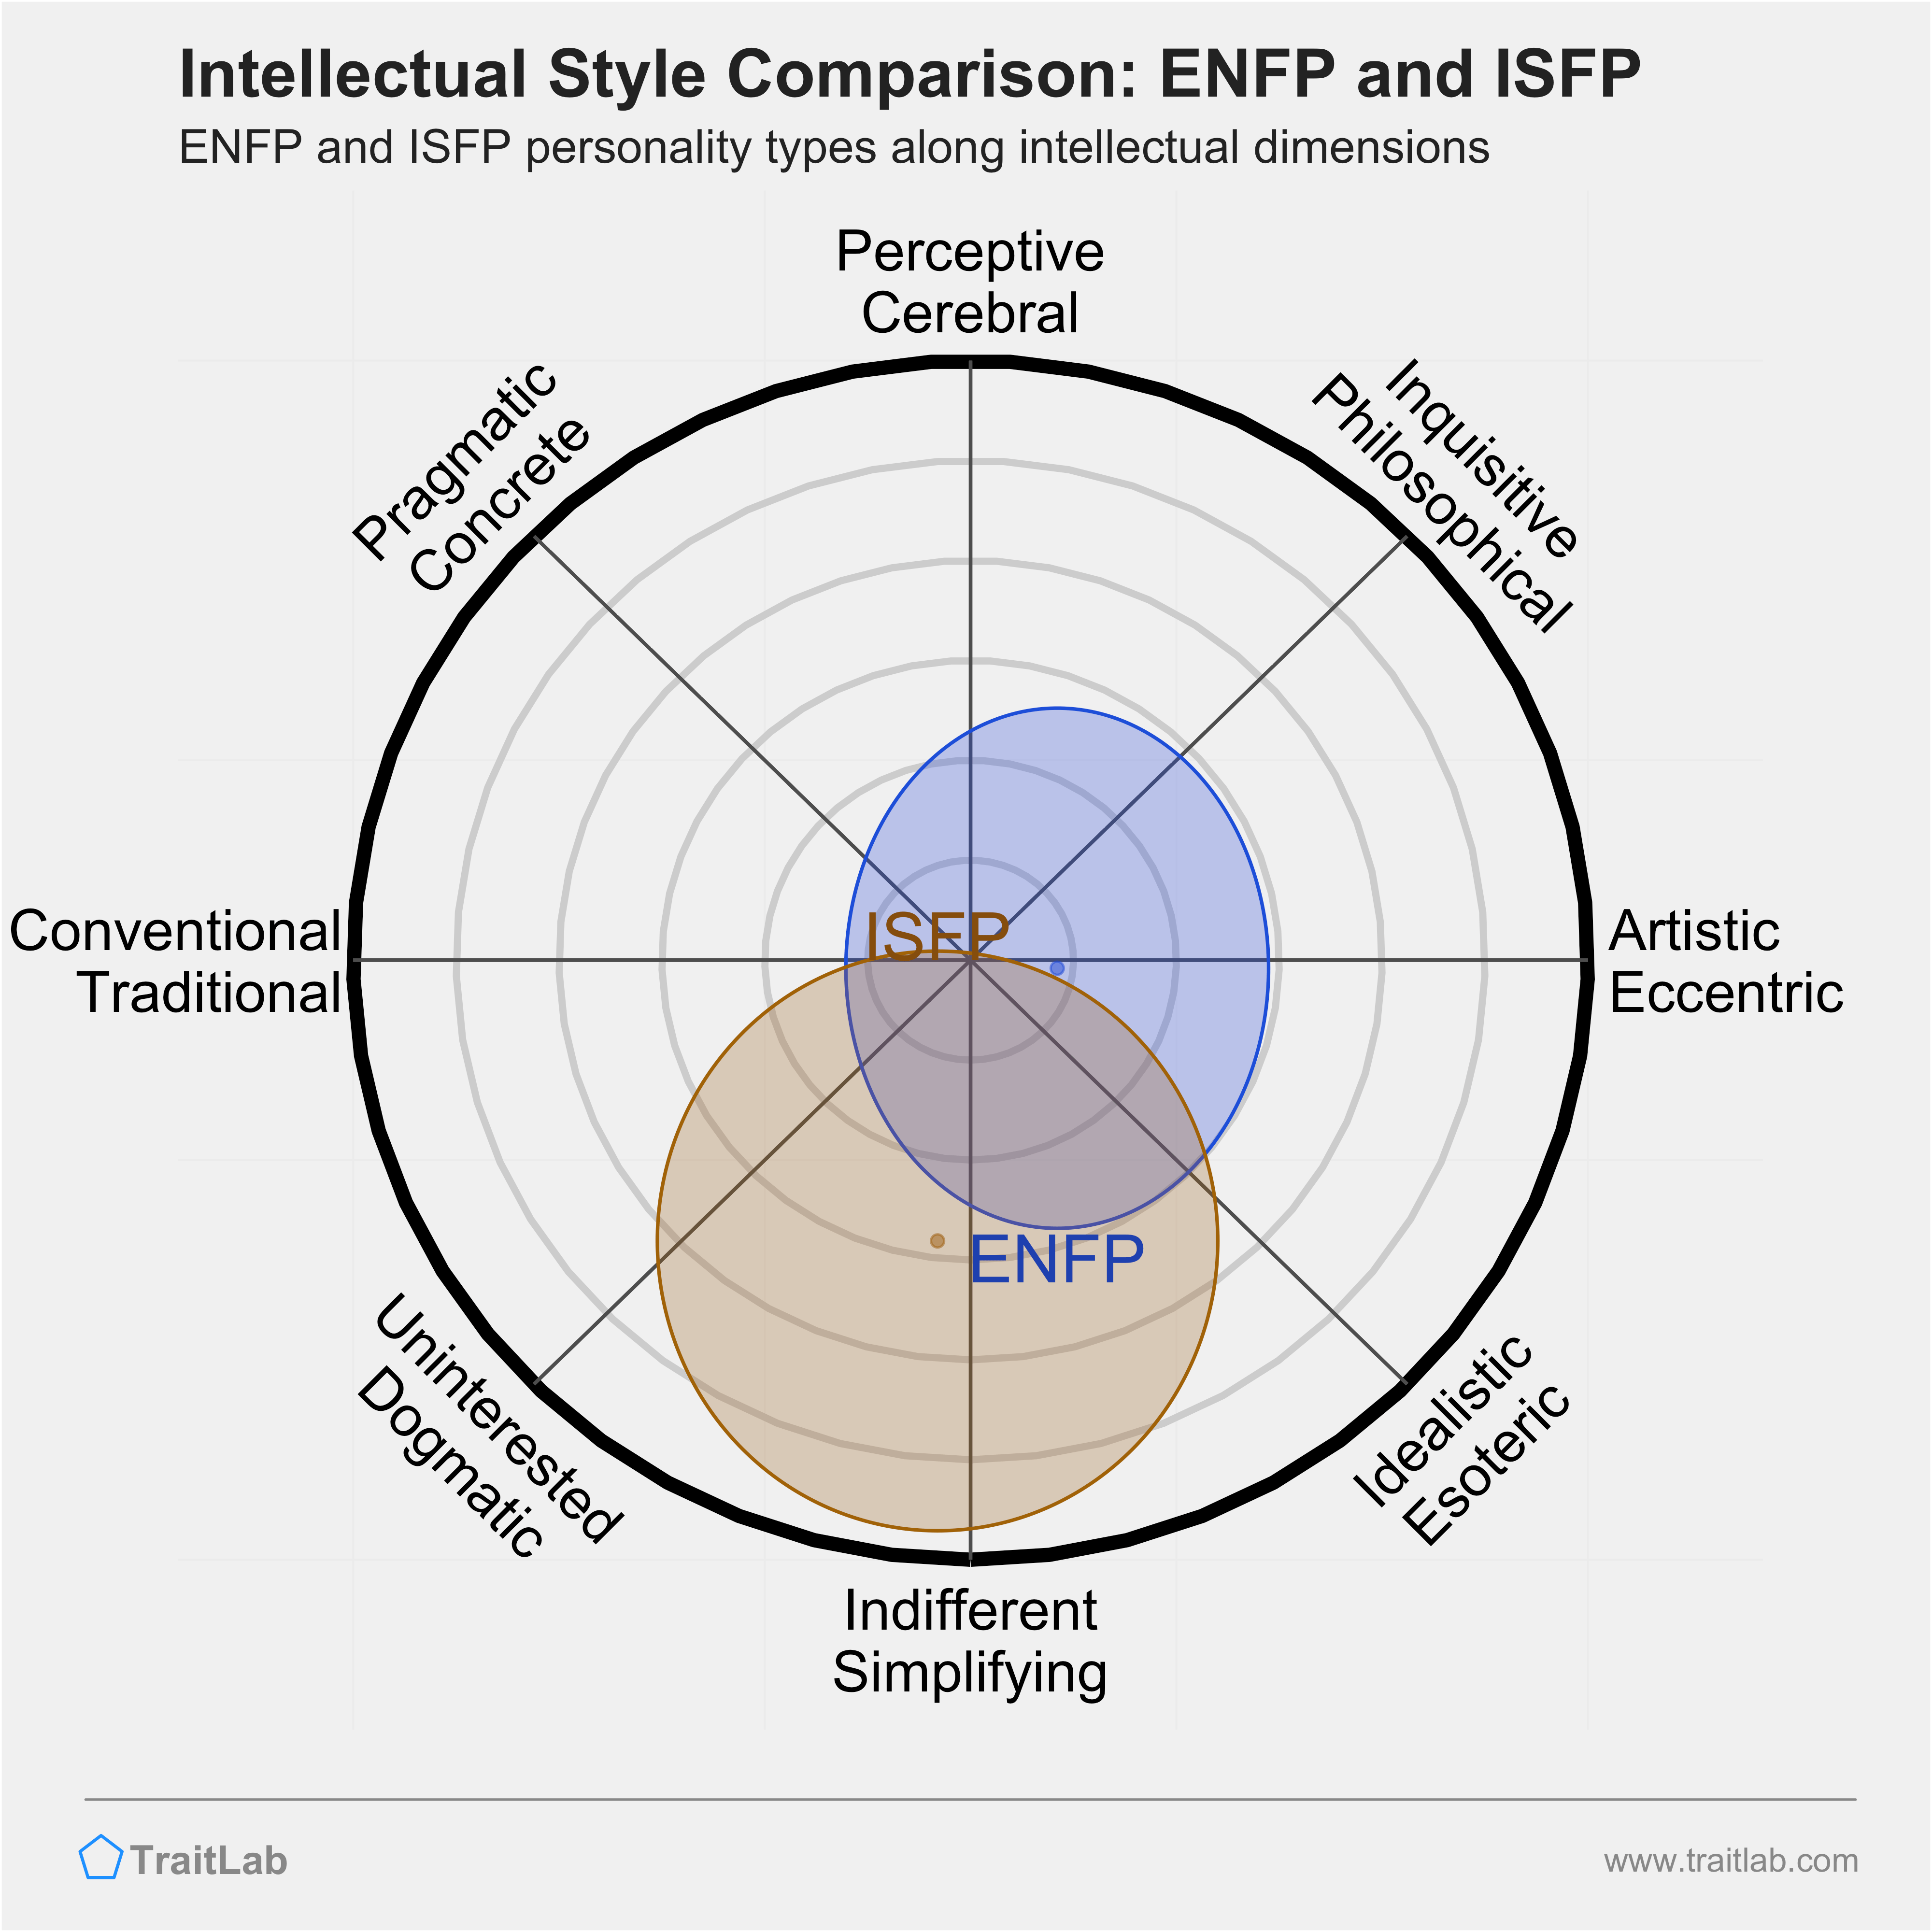 ENFP and ISFP comparison across intellectual dimensions